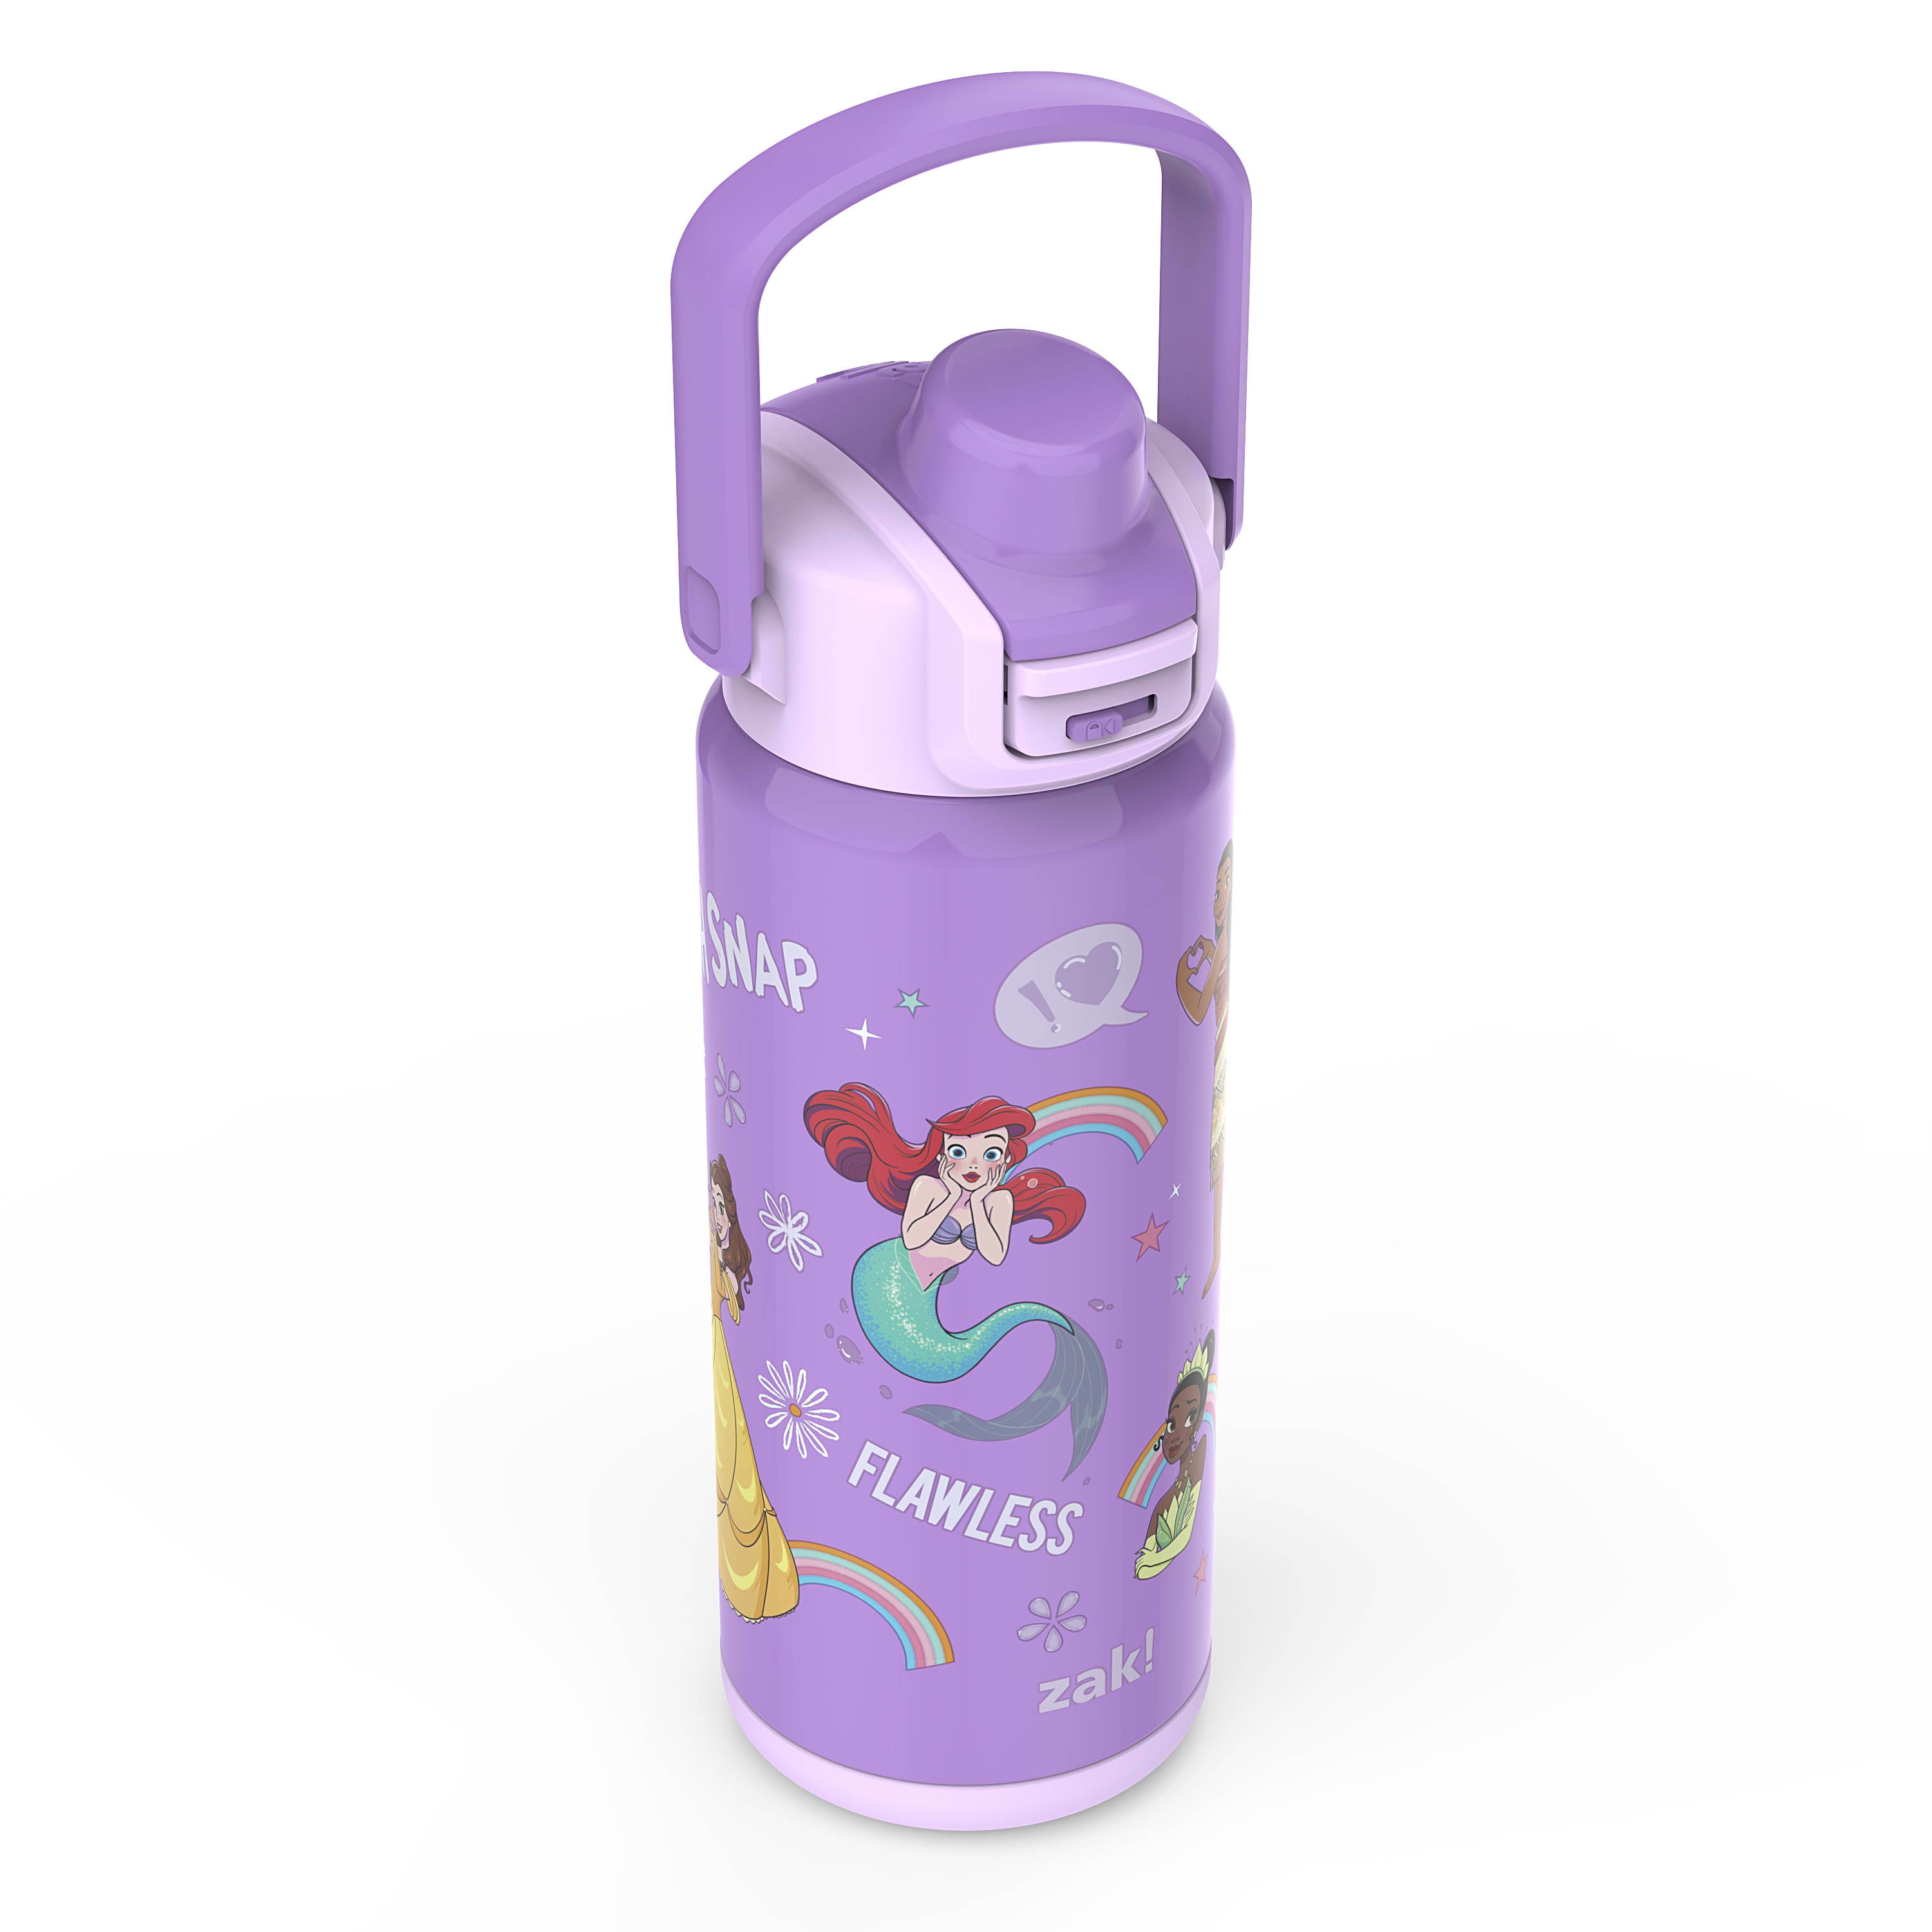 I Was Born A Princess Double Wall Water Bottle Funny Girls Girly Thermal  Joke